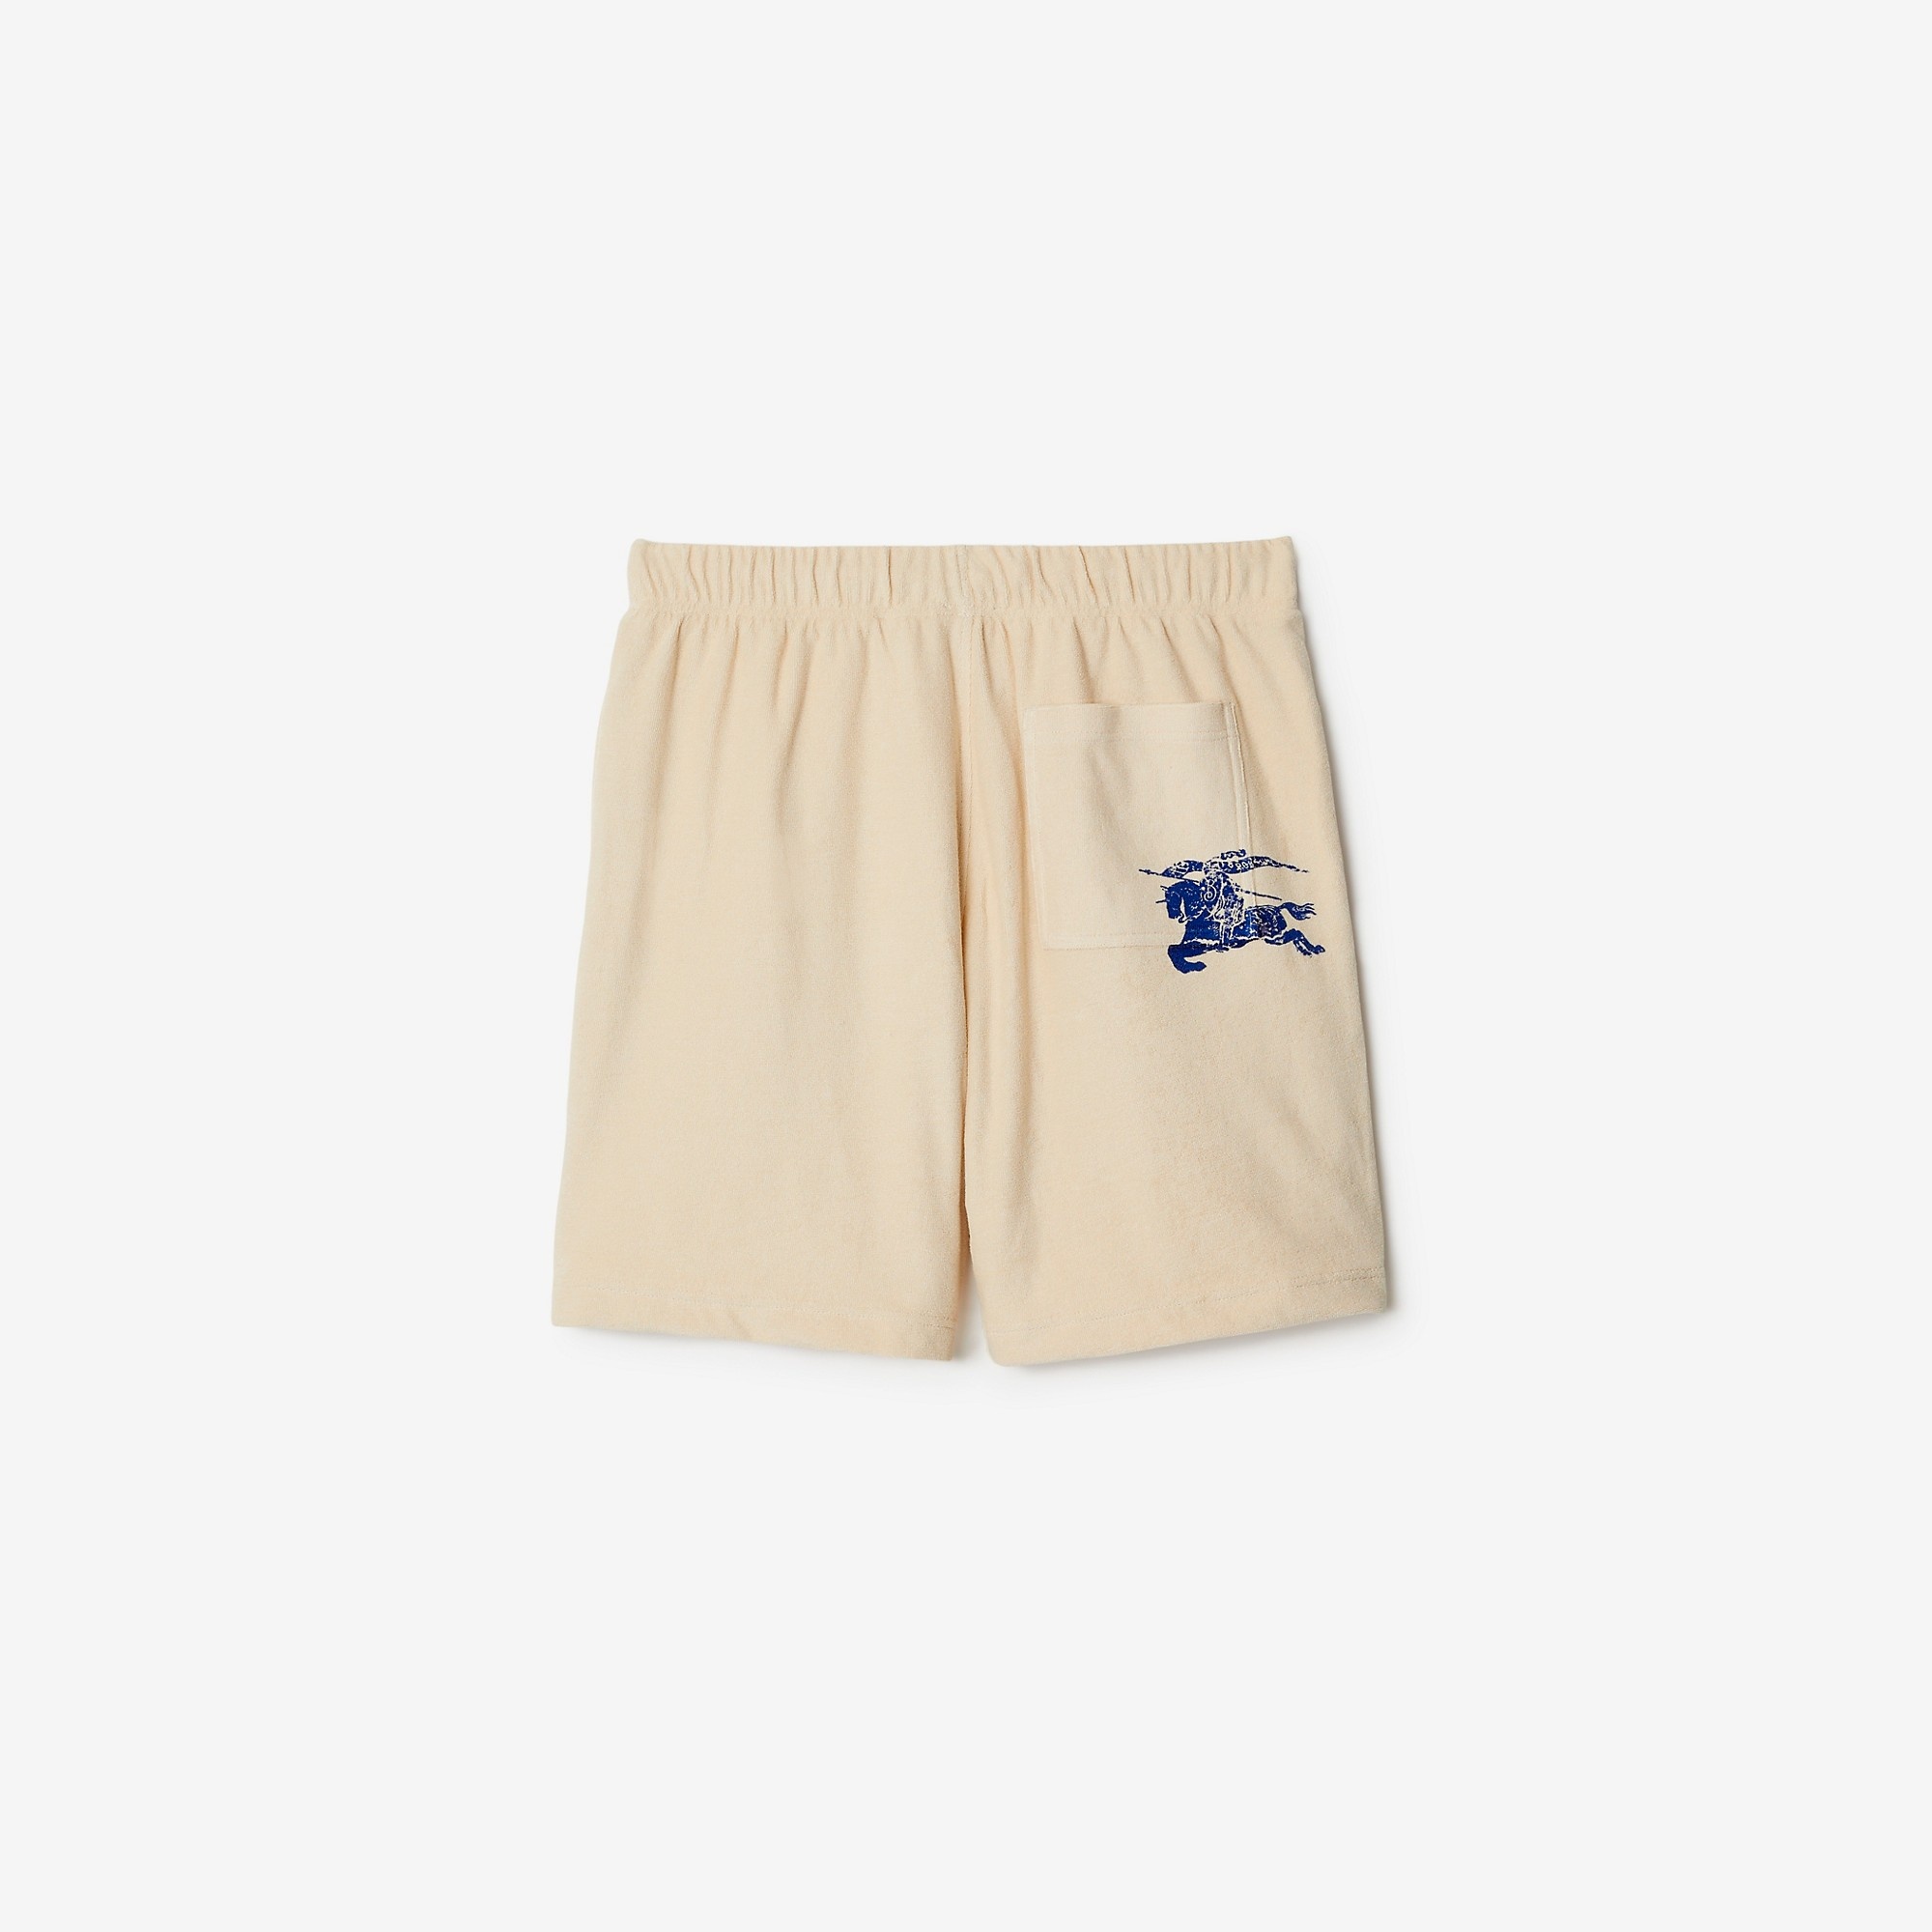 Cotton Towelling Shorts - 5